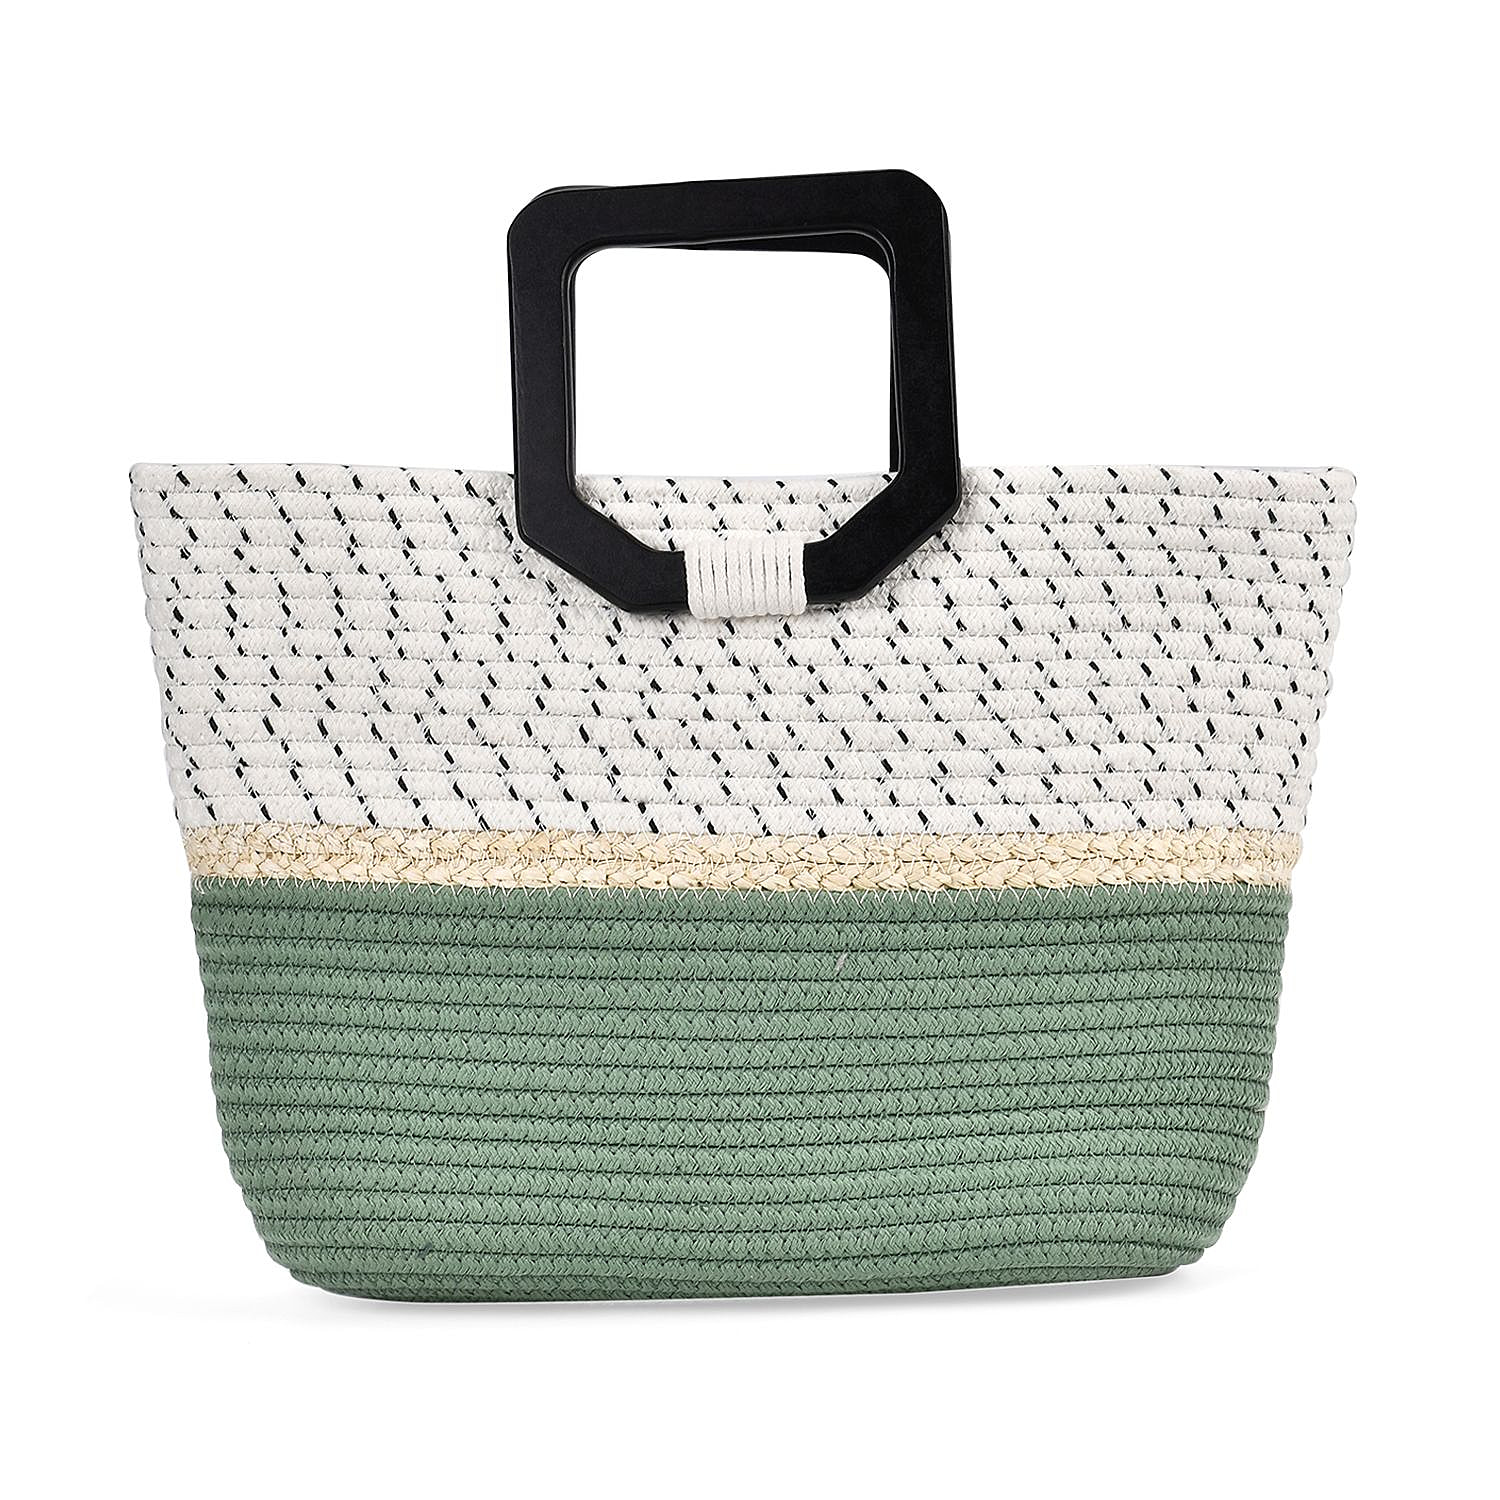 Cotton Knitted Patterned Tote Bag - Green